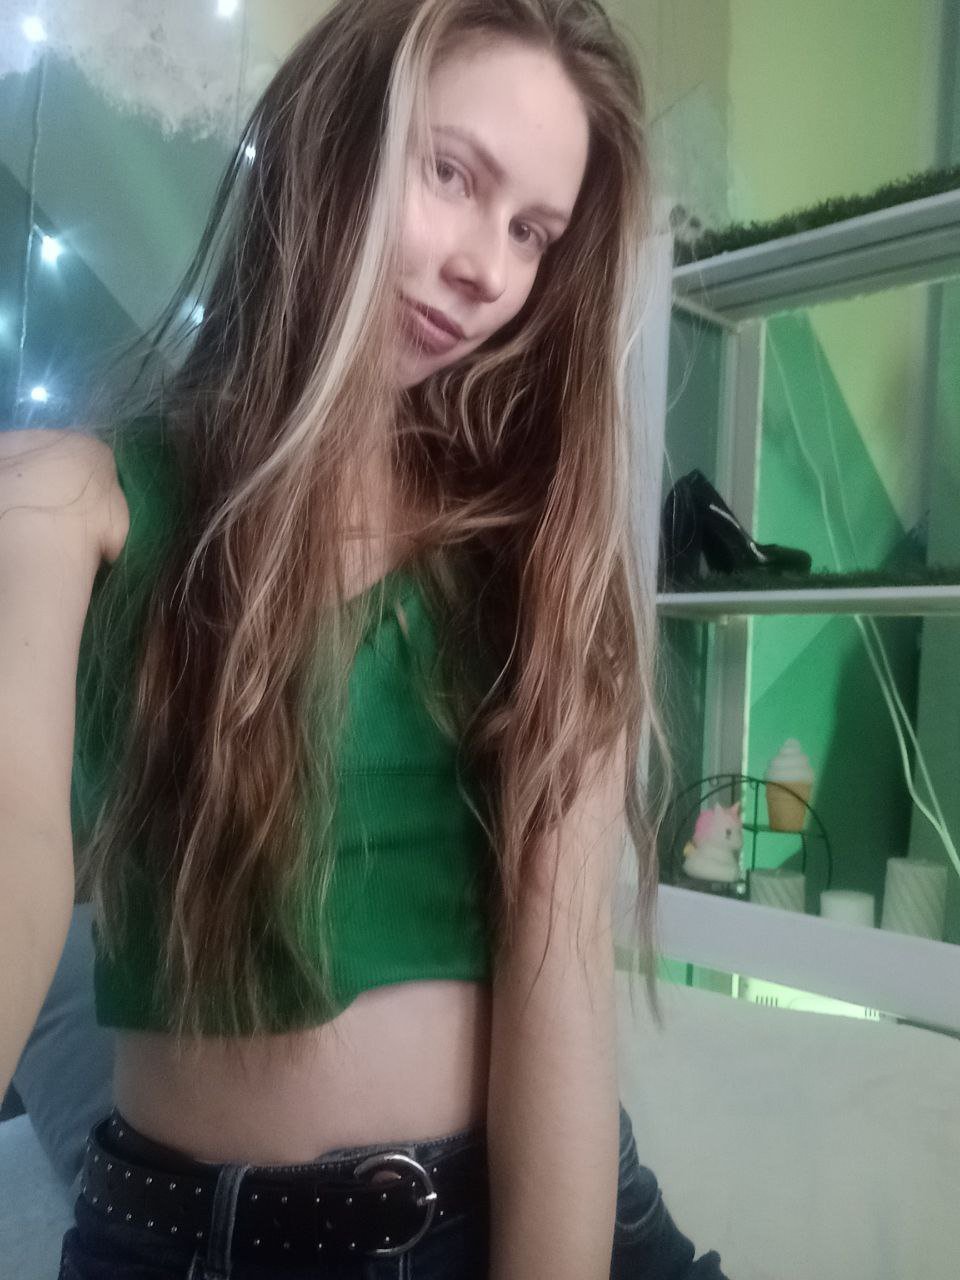 Image of cam model OliviaSweety from XloveCam